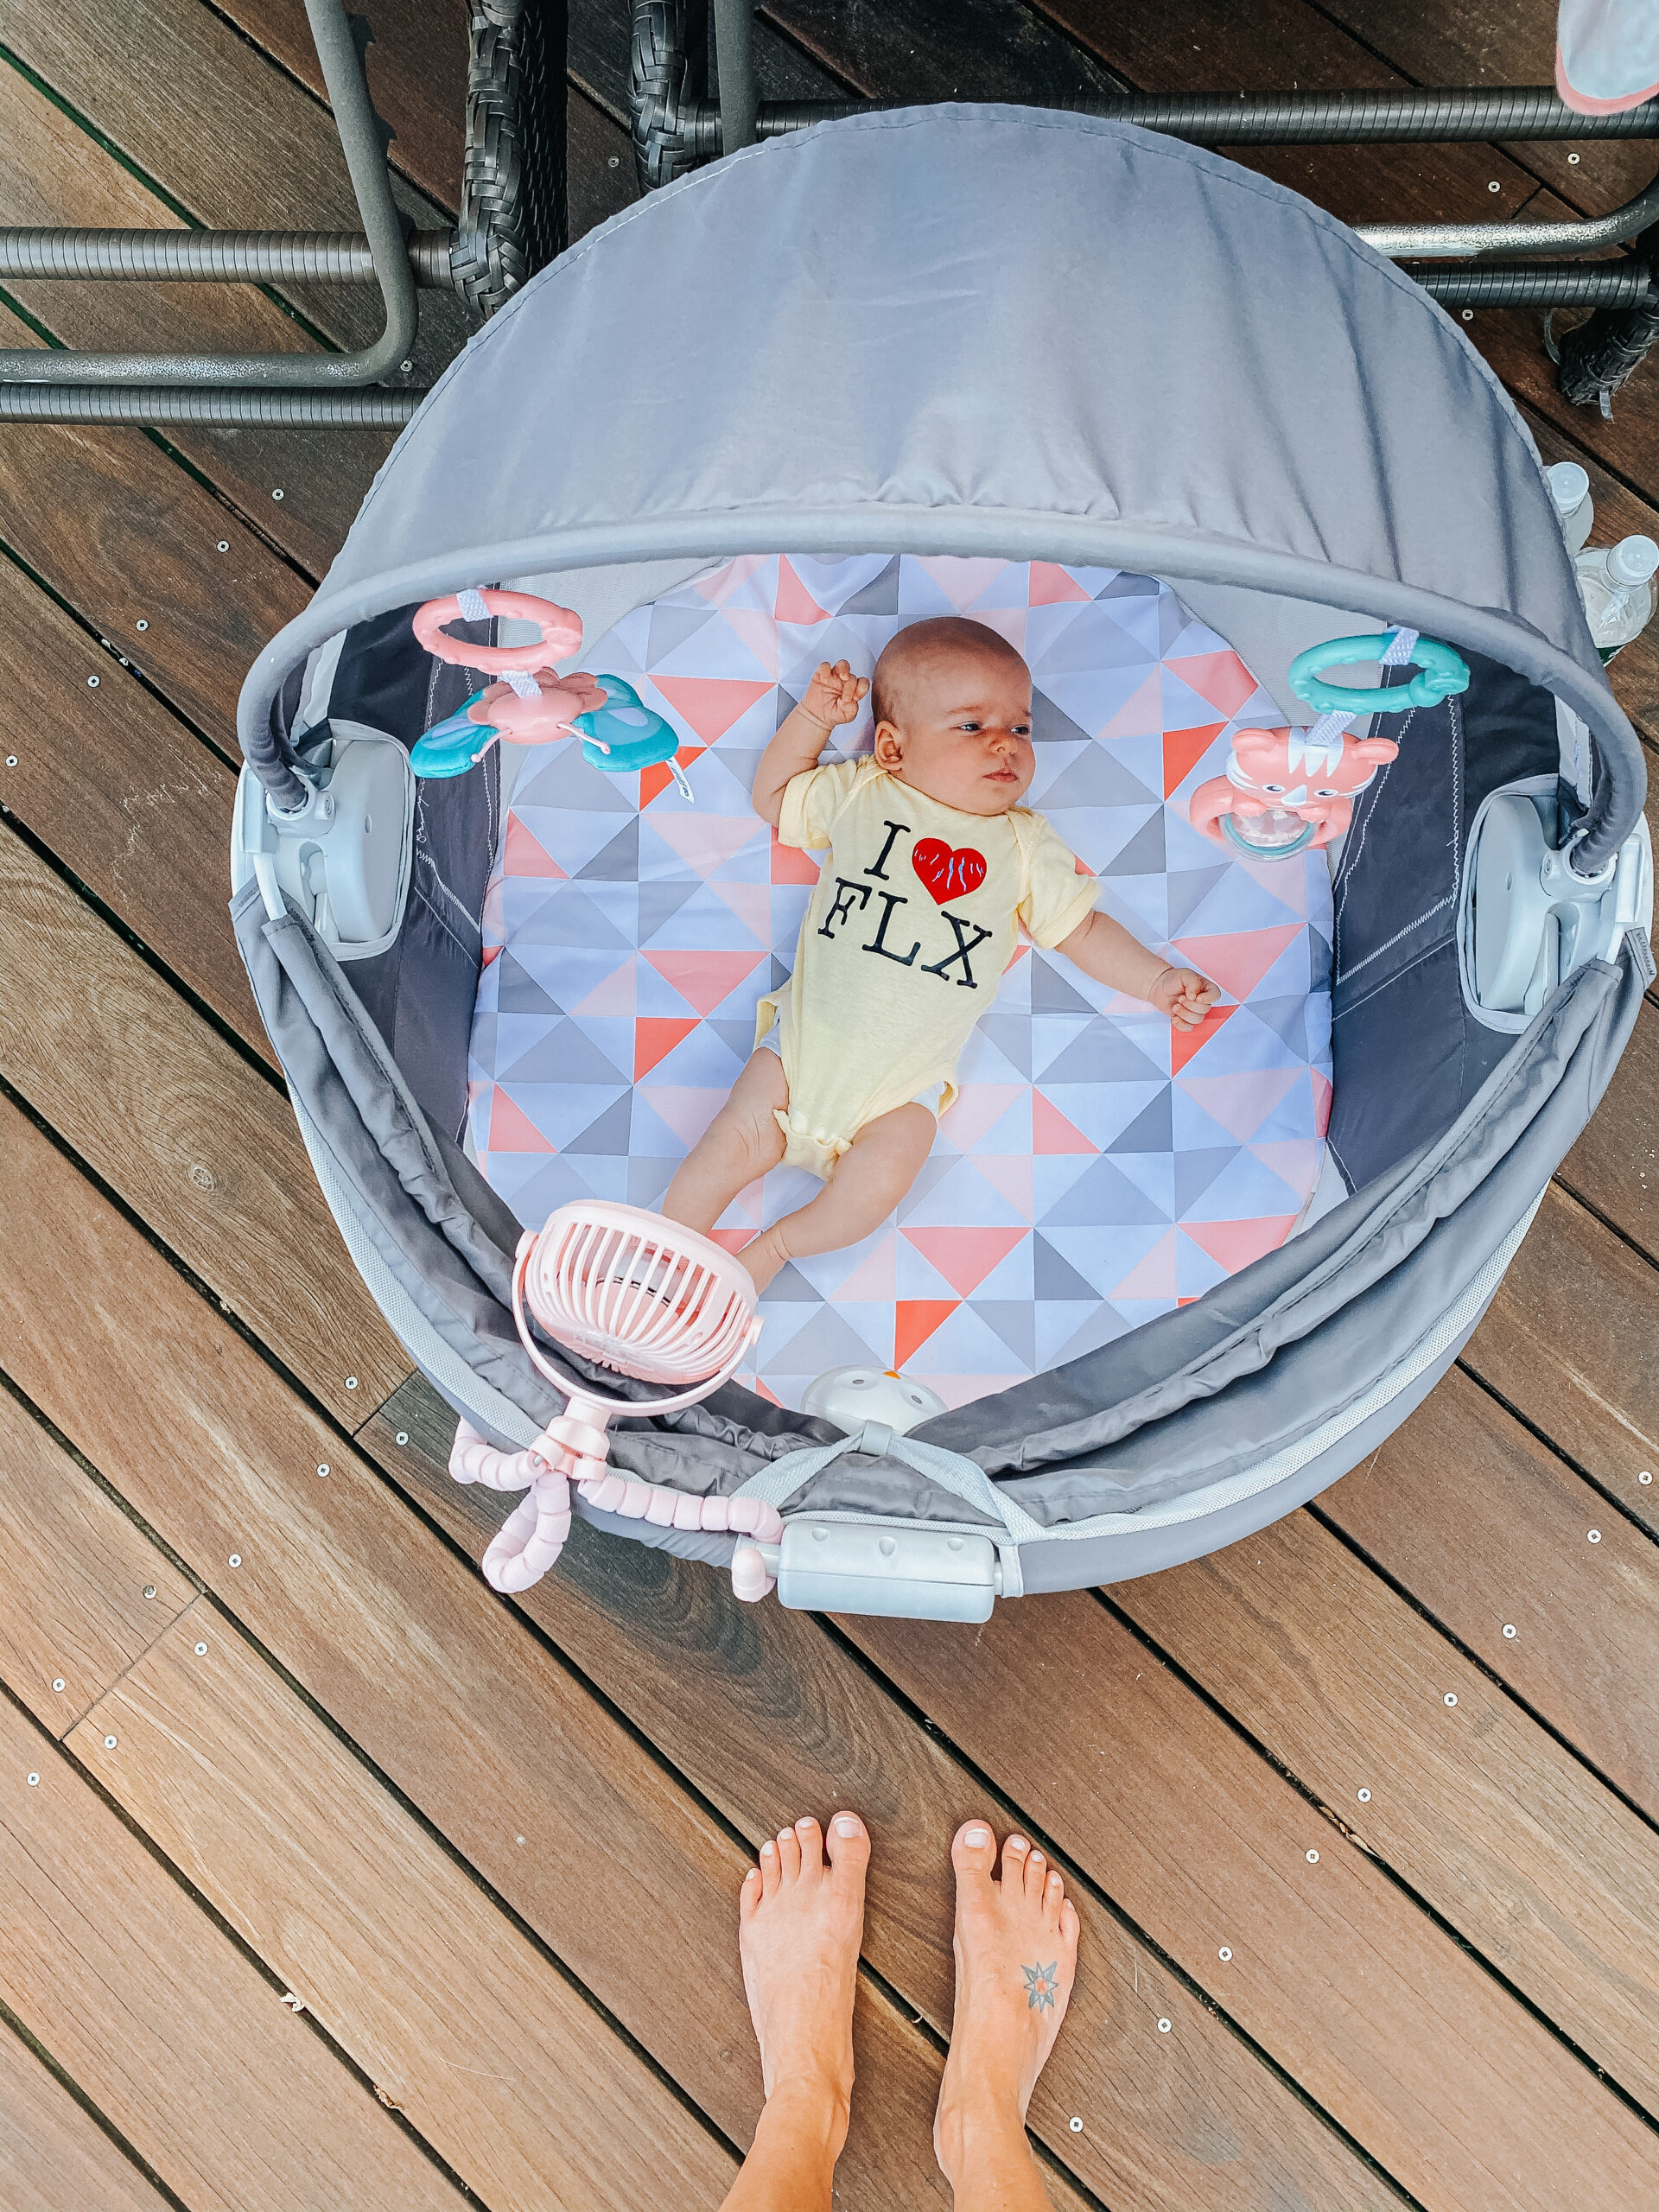 Newborn baby laying in portable dome with fan on deck in summer